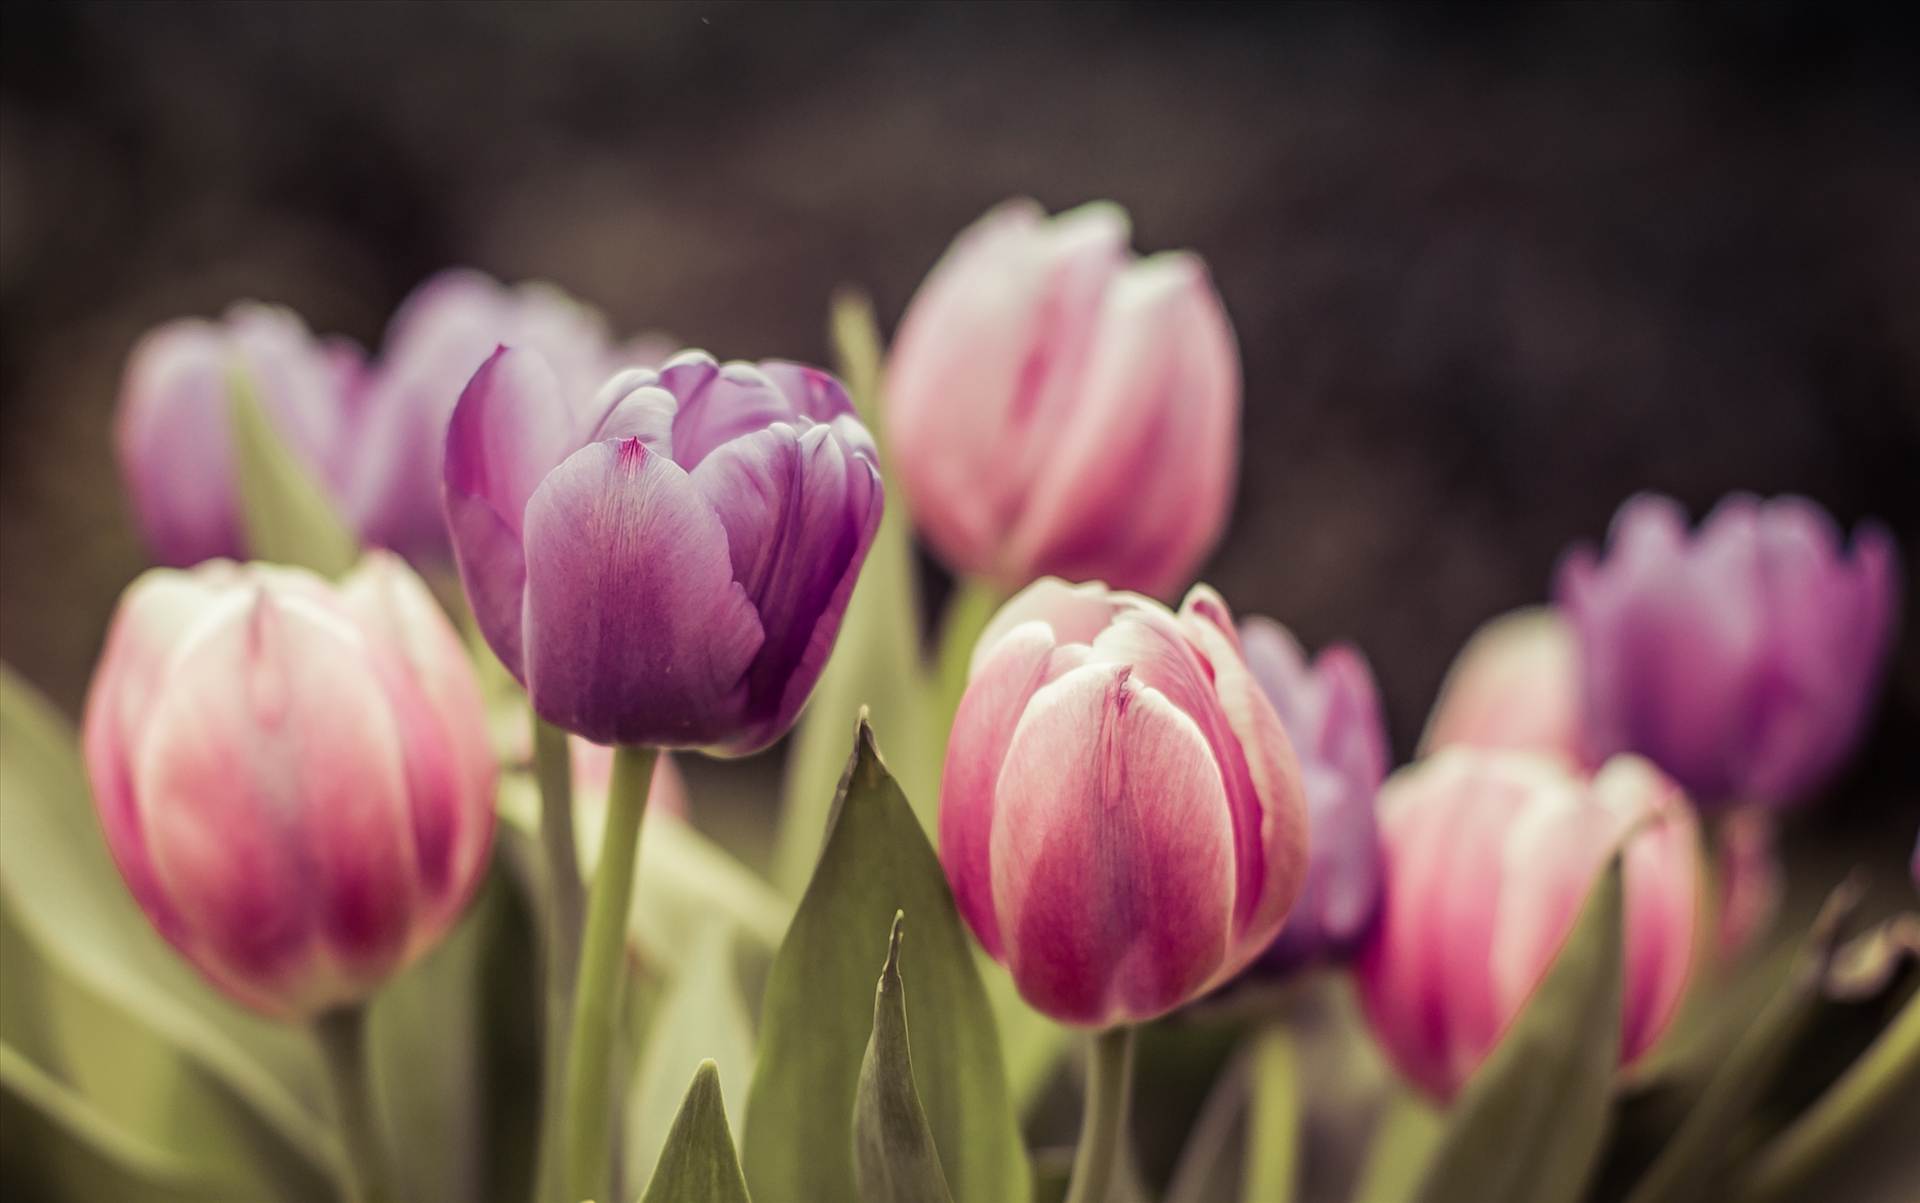 Tulips.jpg  by WPC-187